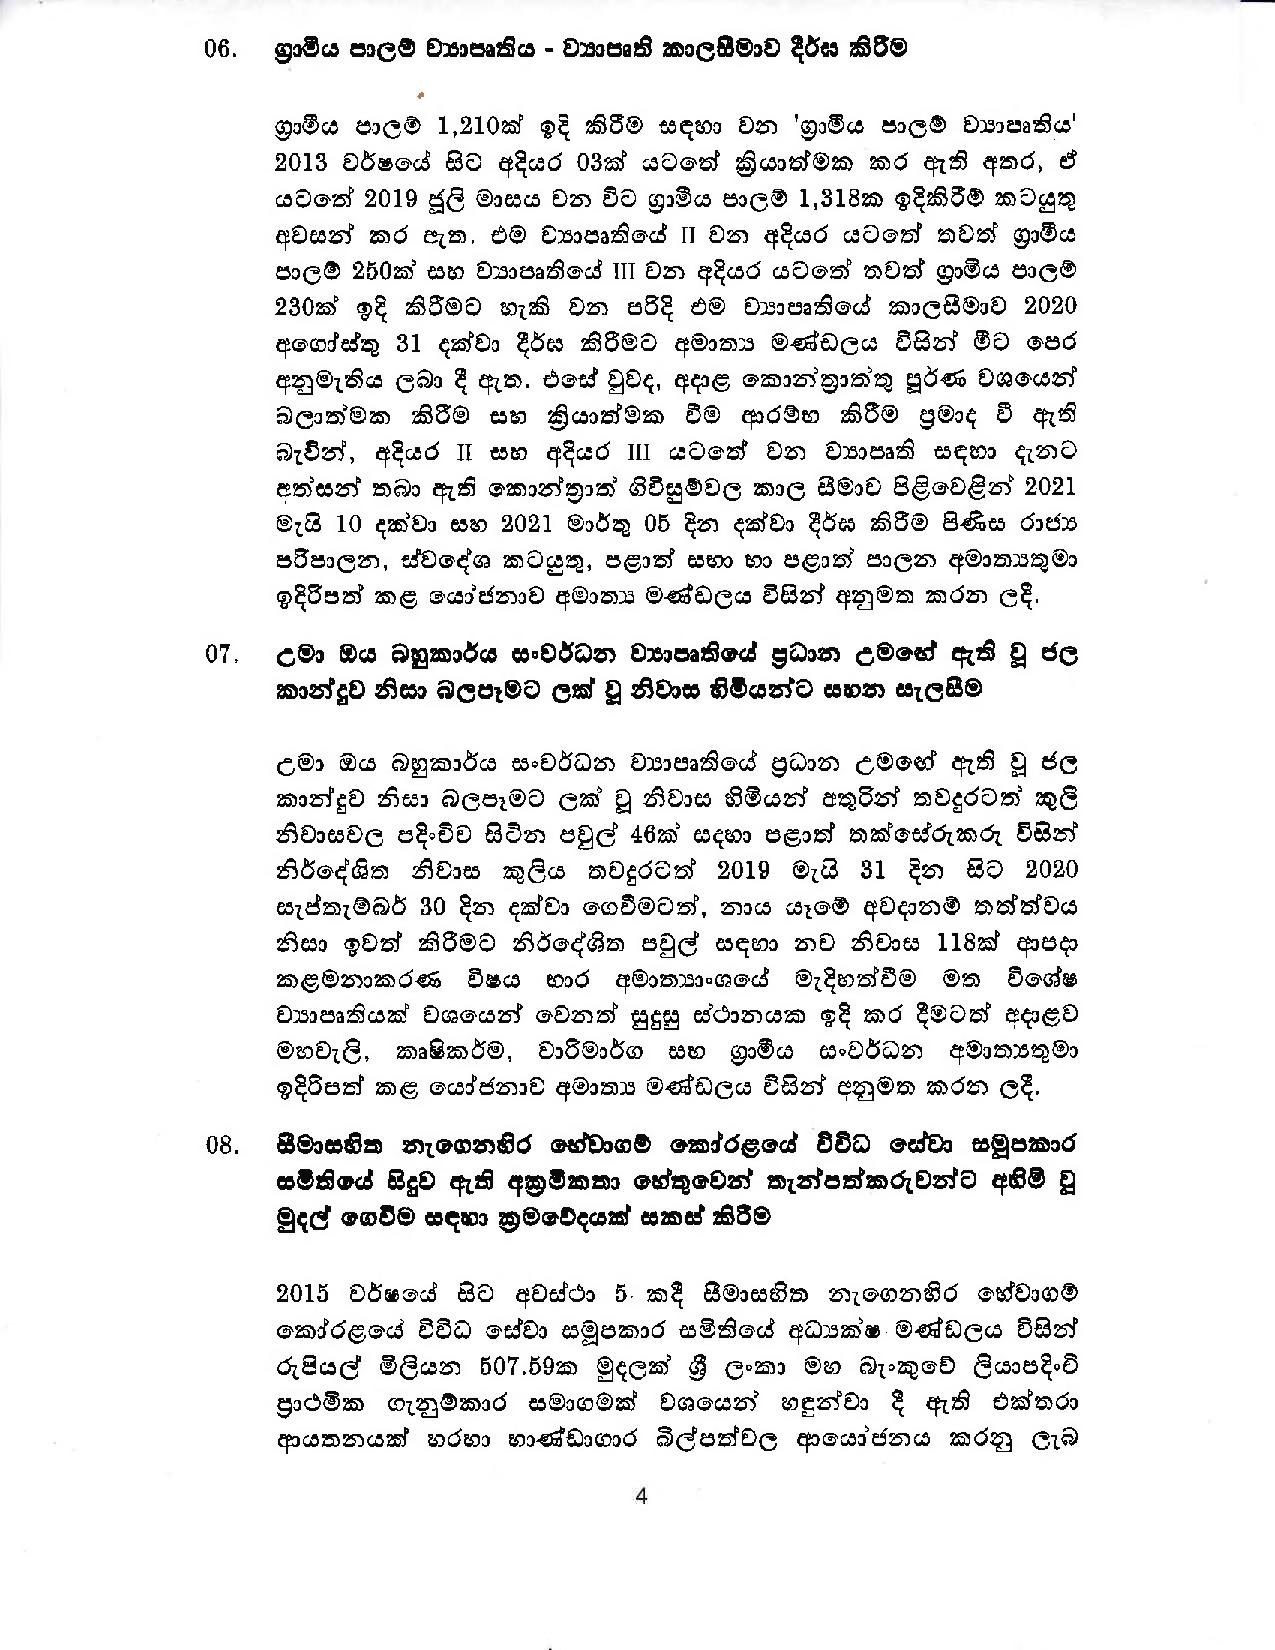 Cabinet Decision on 22.07.2020 page 004